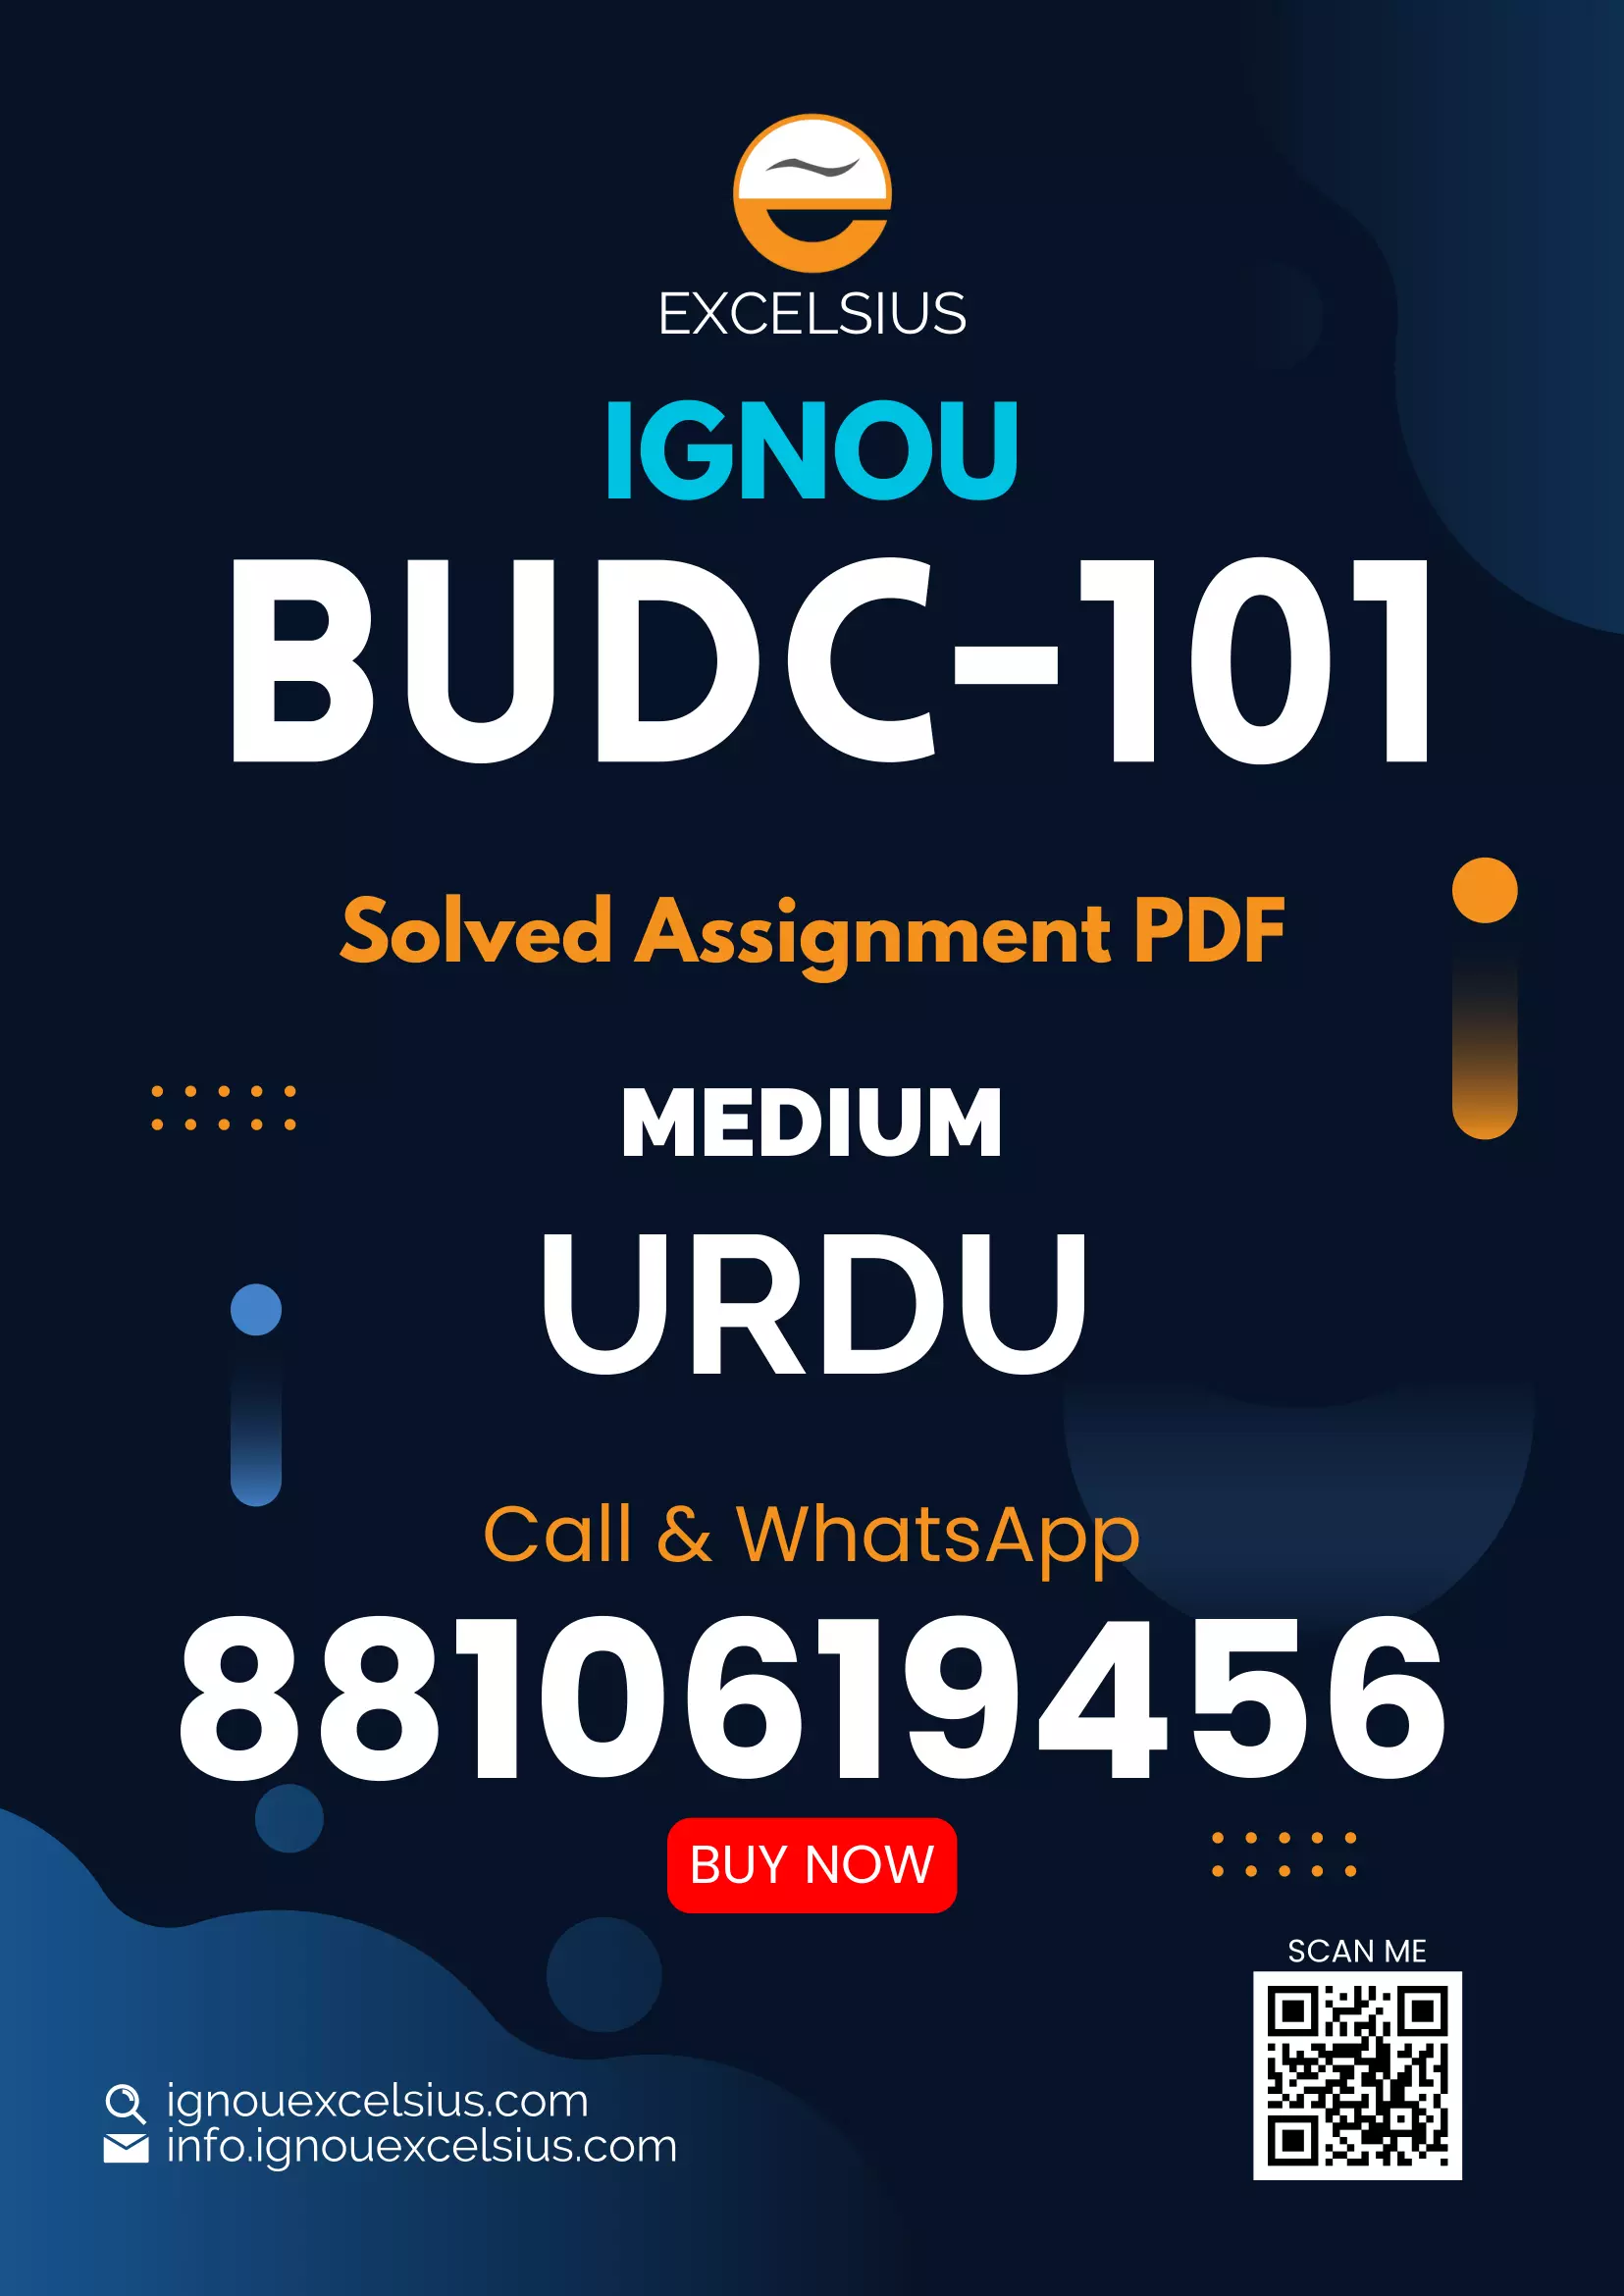 IGNOU BUDC-101 - Study of Urdu Fiction Latest Solved Assignment -July 2022 – January 2023